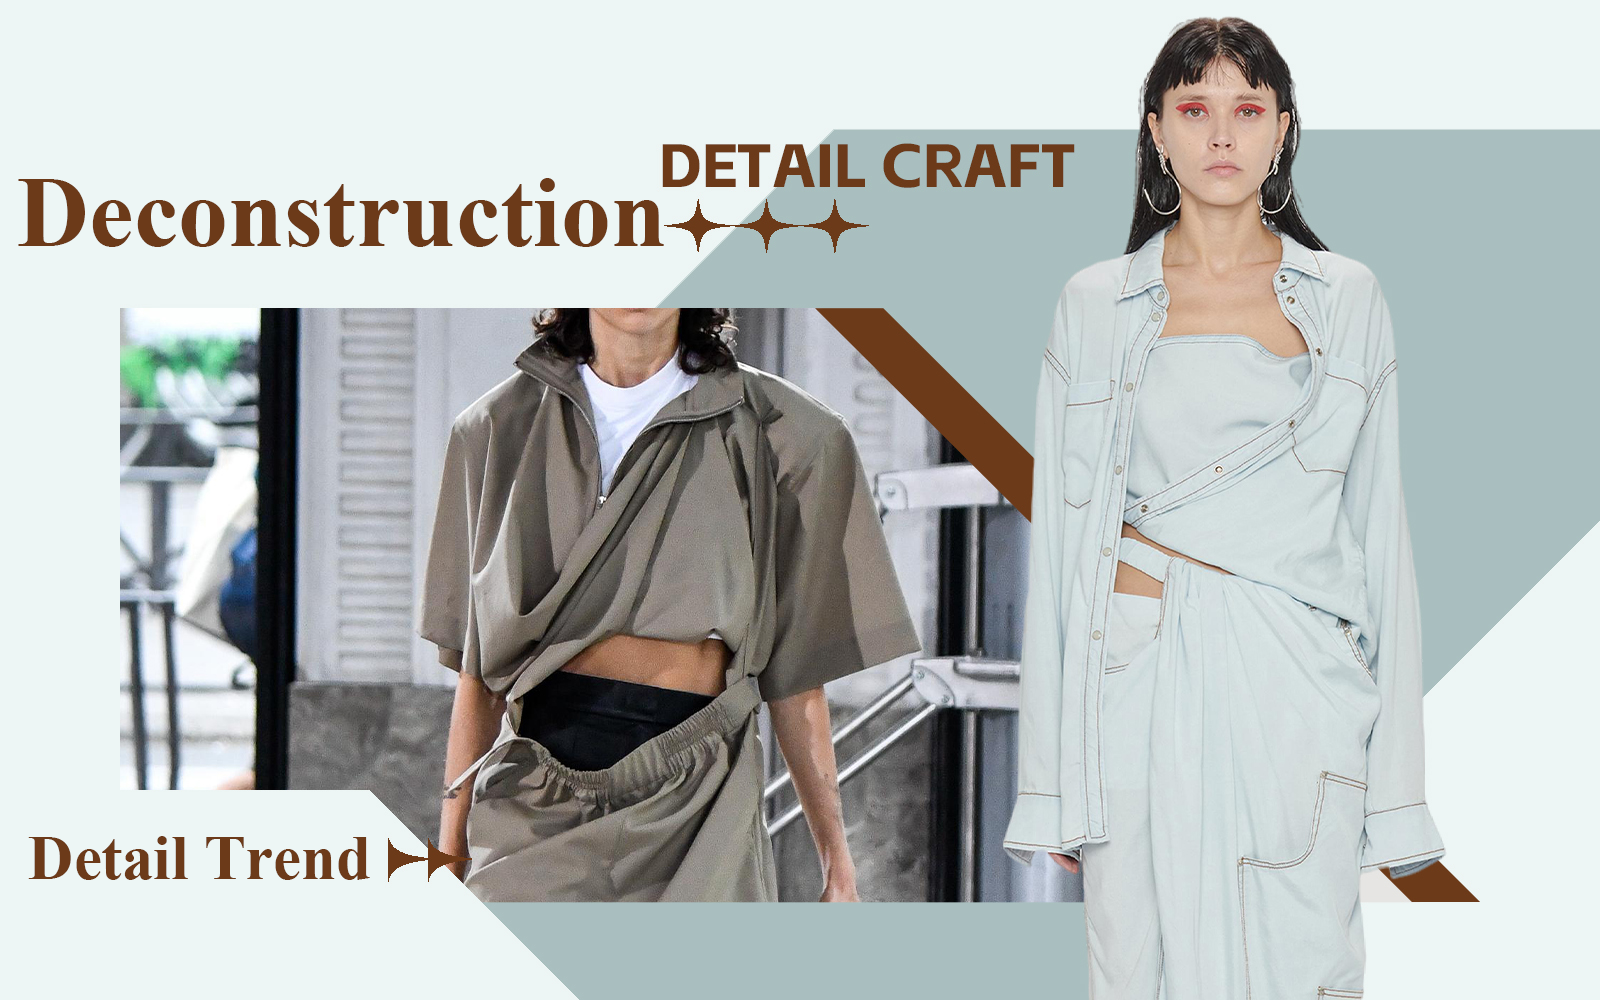 Deconstruction -- The Detail & Craft Trend for Womenswear